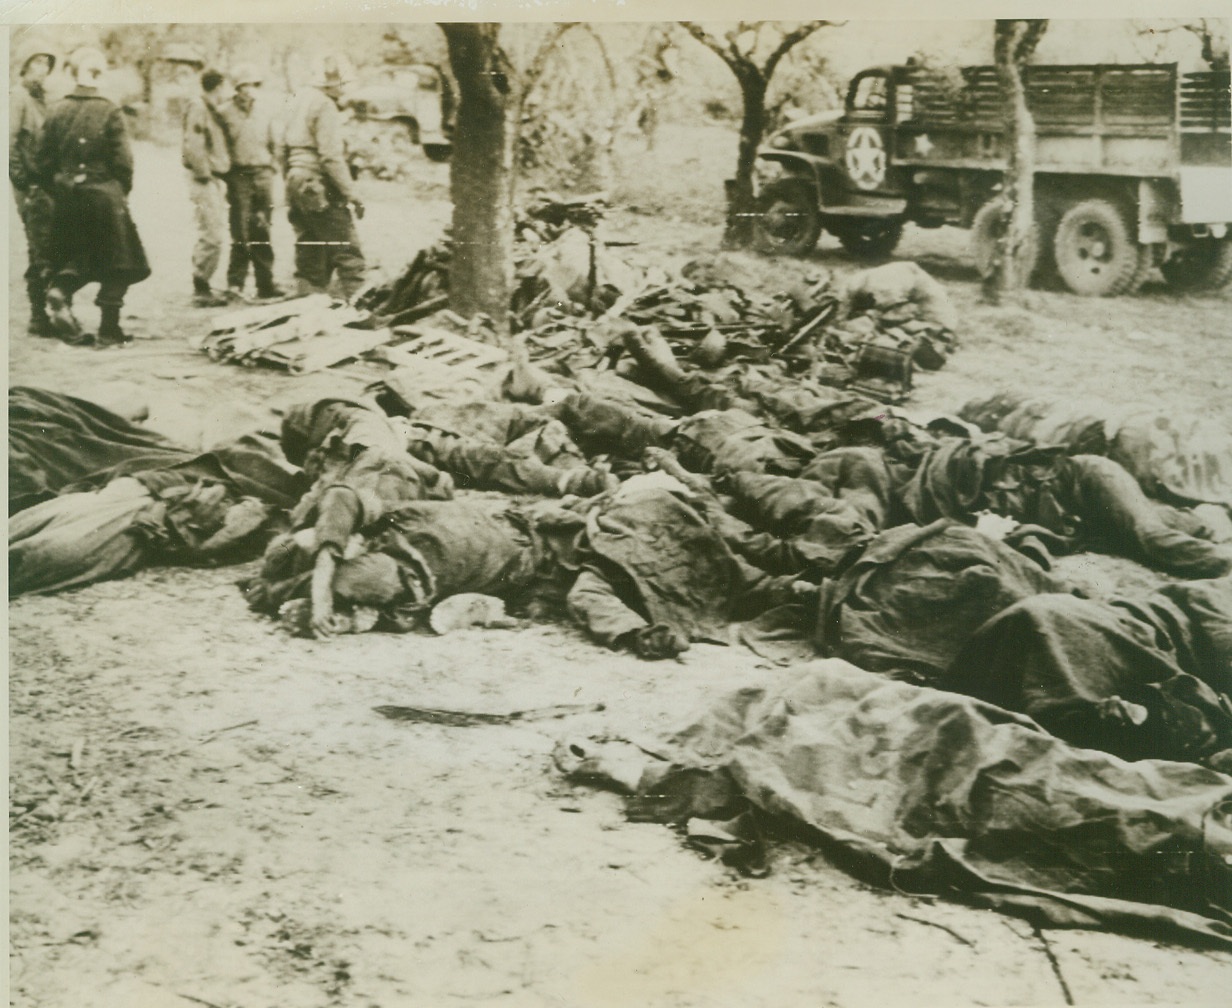 They Died for Hitler, 1/21/1944. San Vittore, Italy – A flock of fallen Nazi warriors lies, with a batch of German equipment, on the ground at San Vittore collecting point. American Medical Corps personnel can be seen in background. Credit: (U.S. Army Radiotelephoto from ACME);